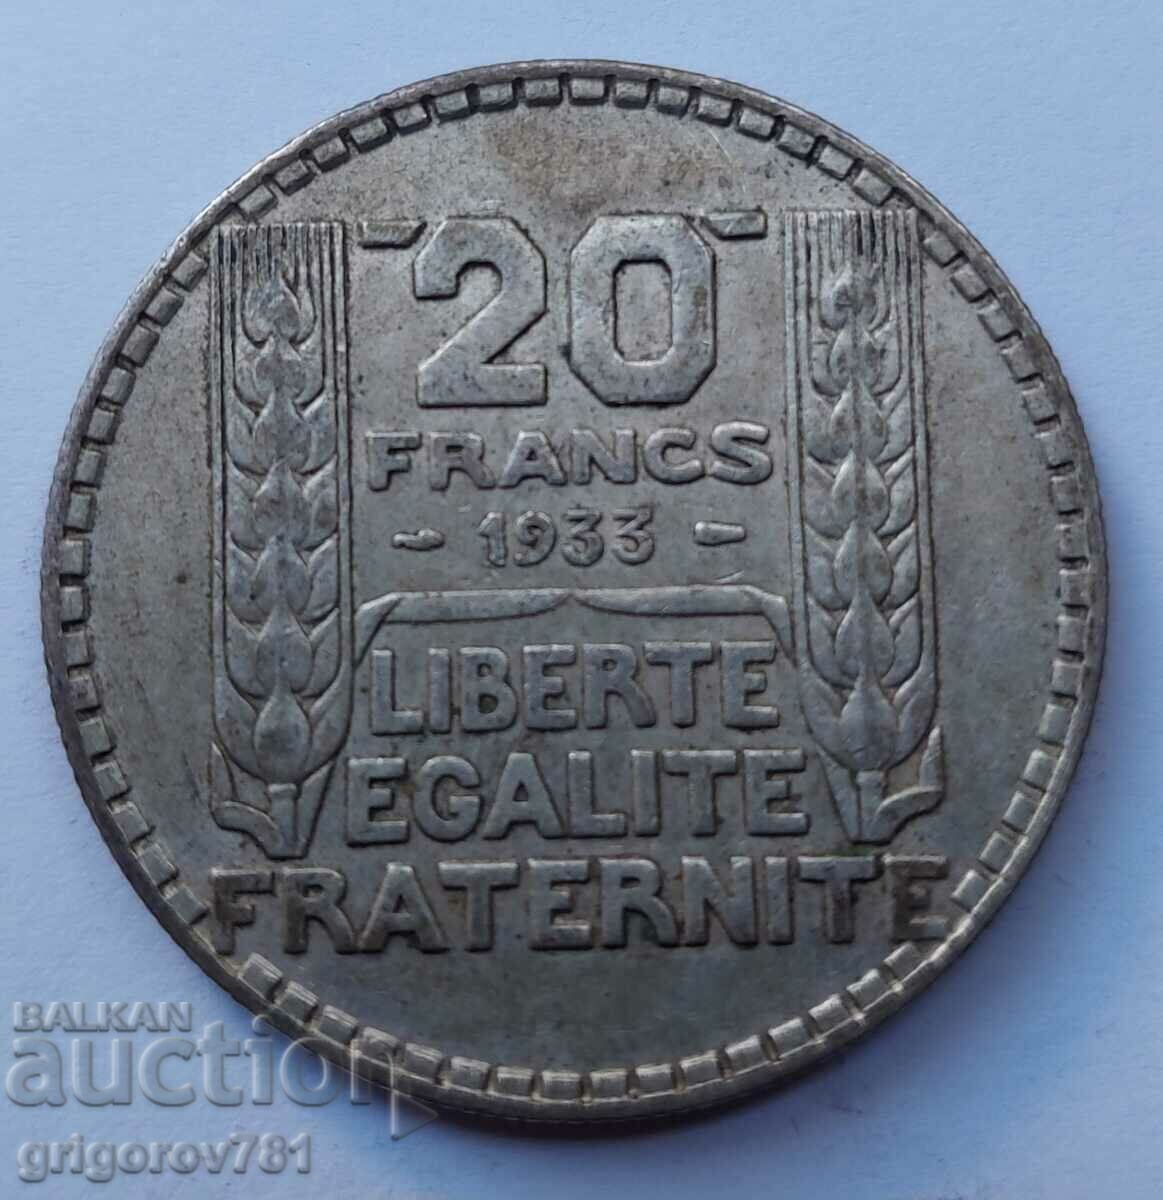 20 Francs Silver France 1933 - Silver Coin #48